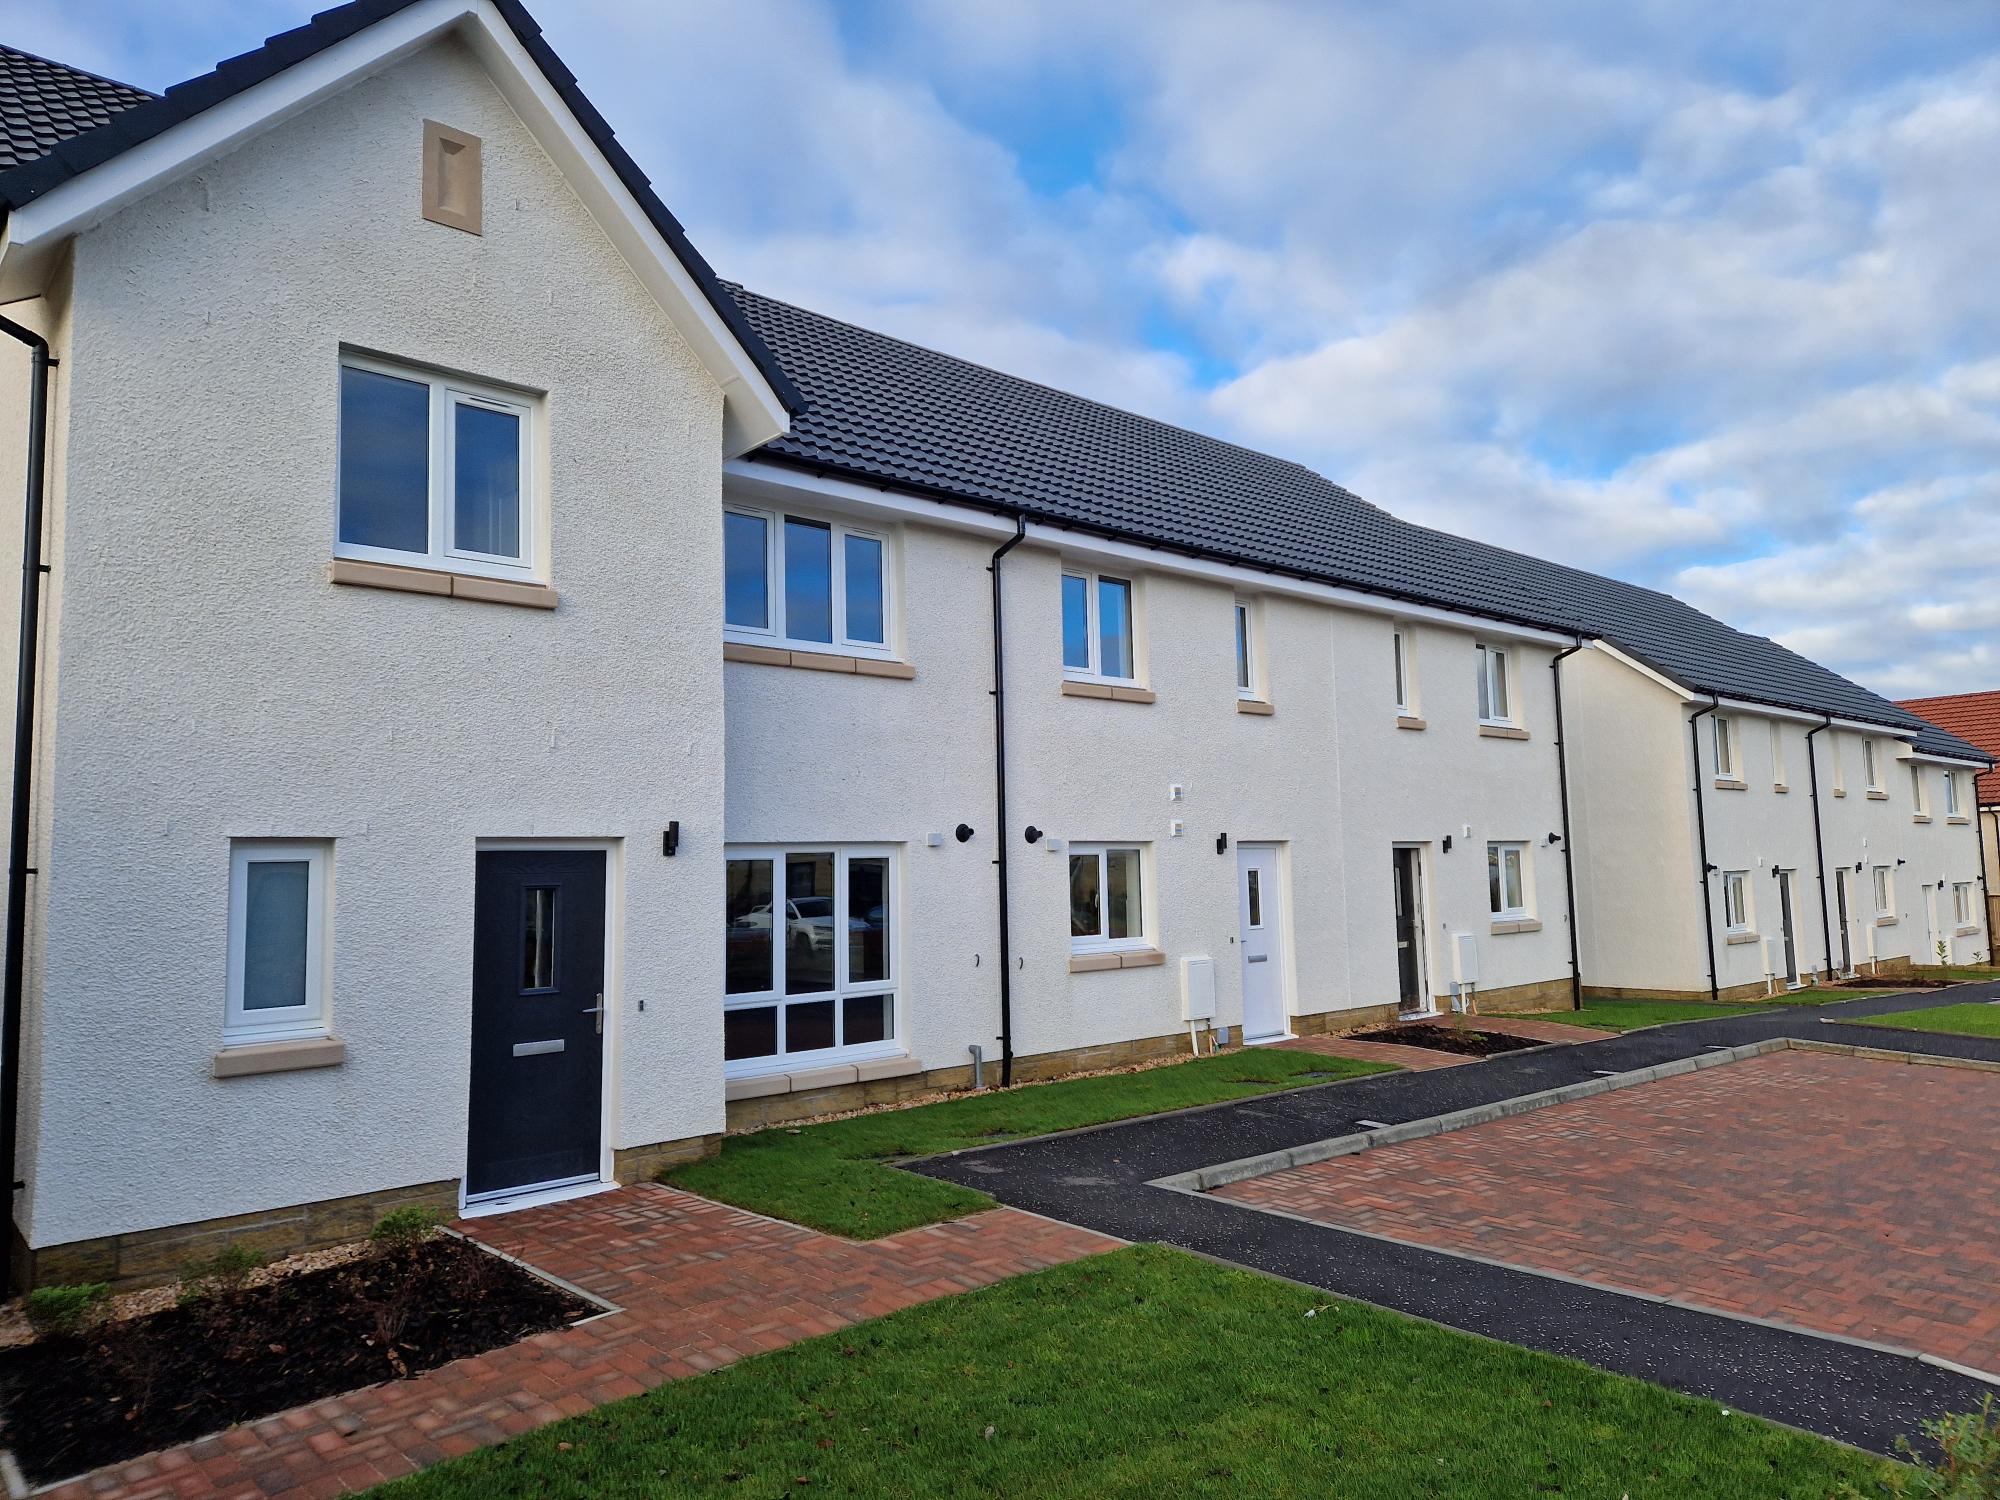 WSHA welcomes first tenants to new homes in Doonfoot